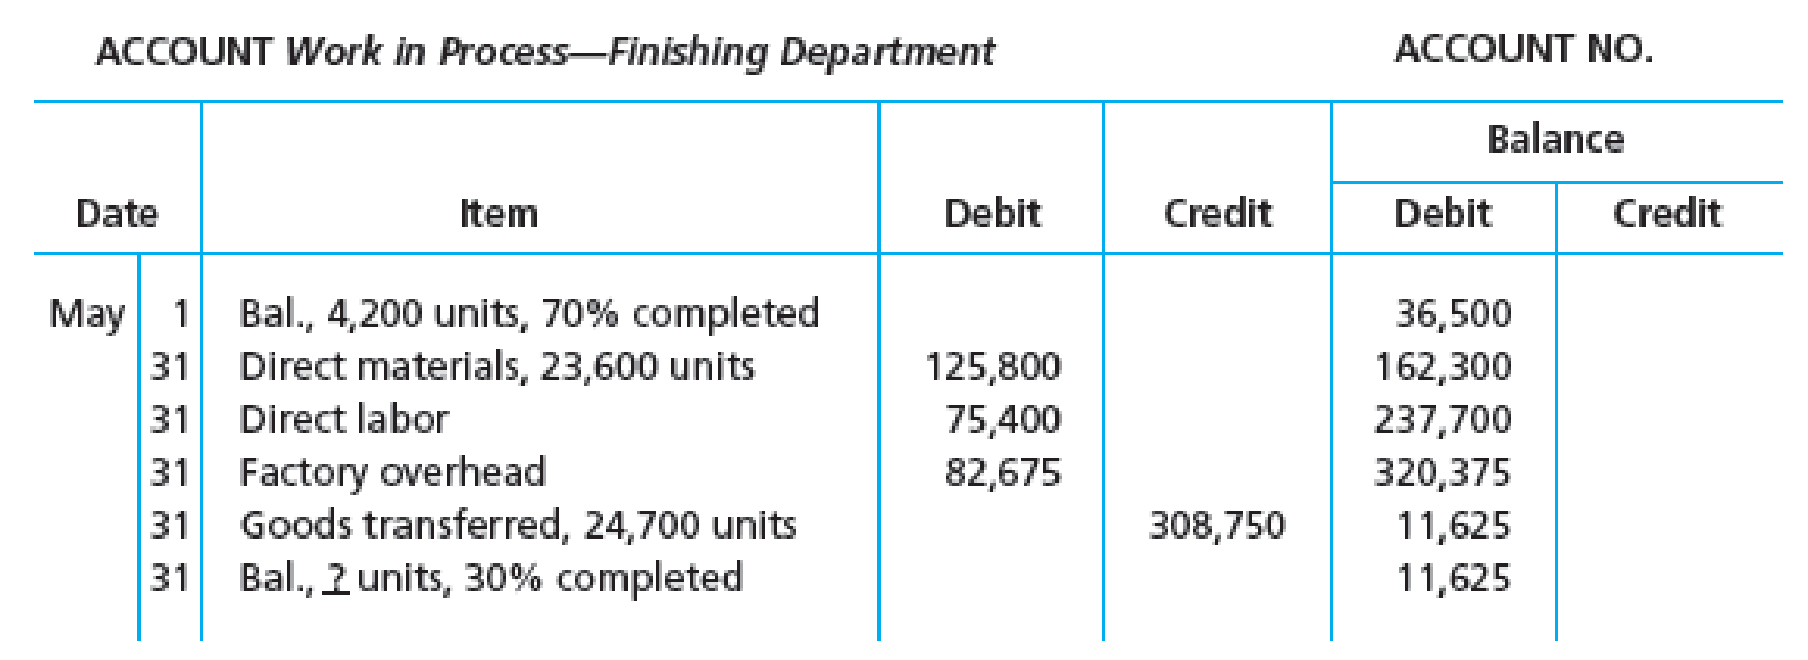 Chapter 3, Problem 23E, The following information concerns production in the Finishing Department for May. The Finishing 